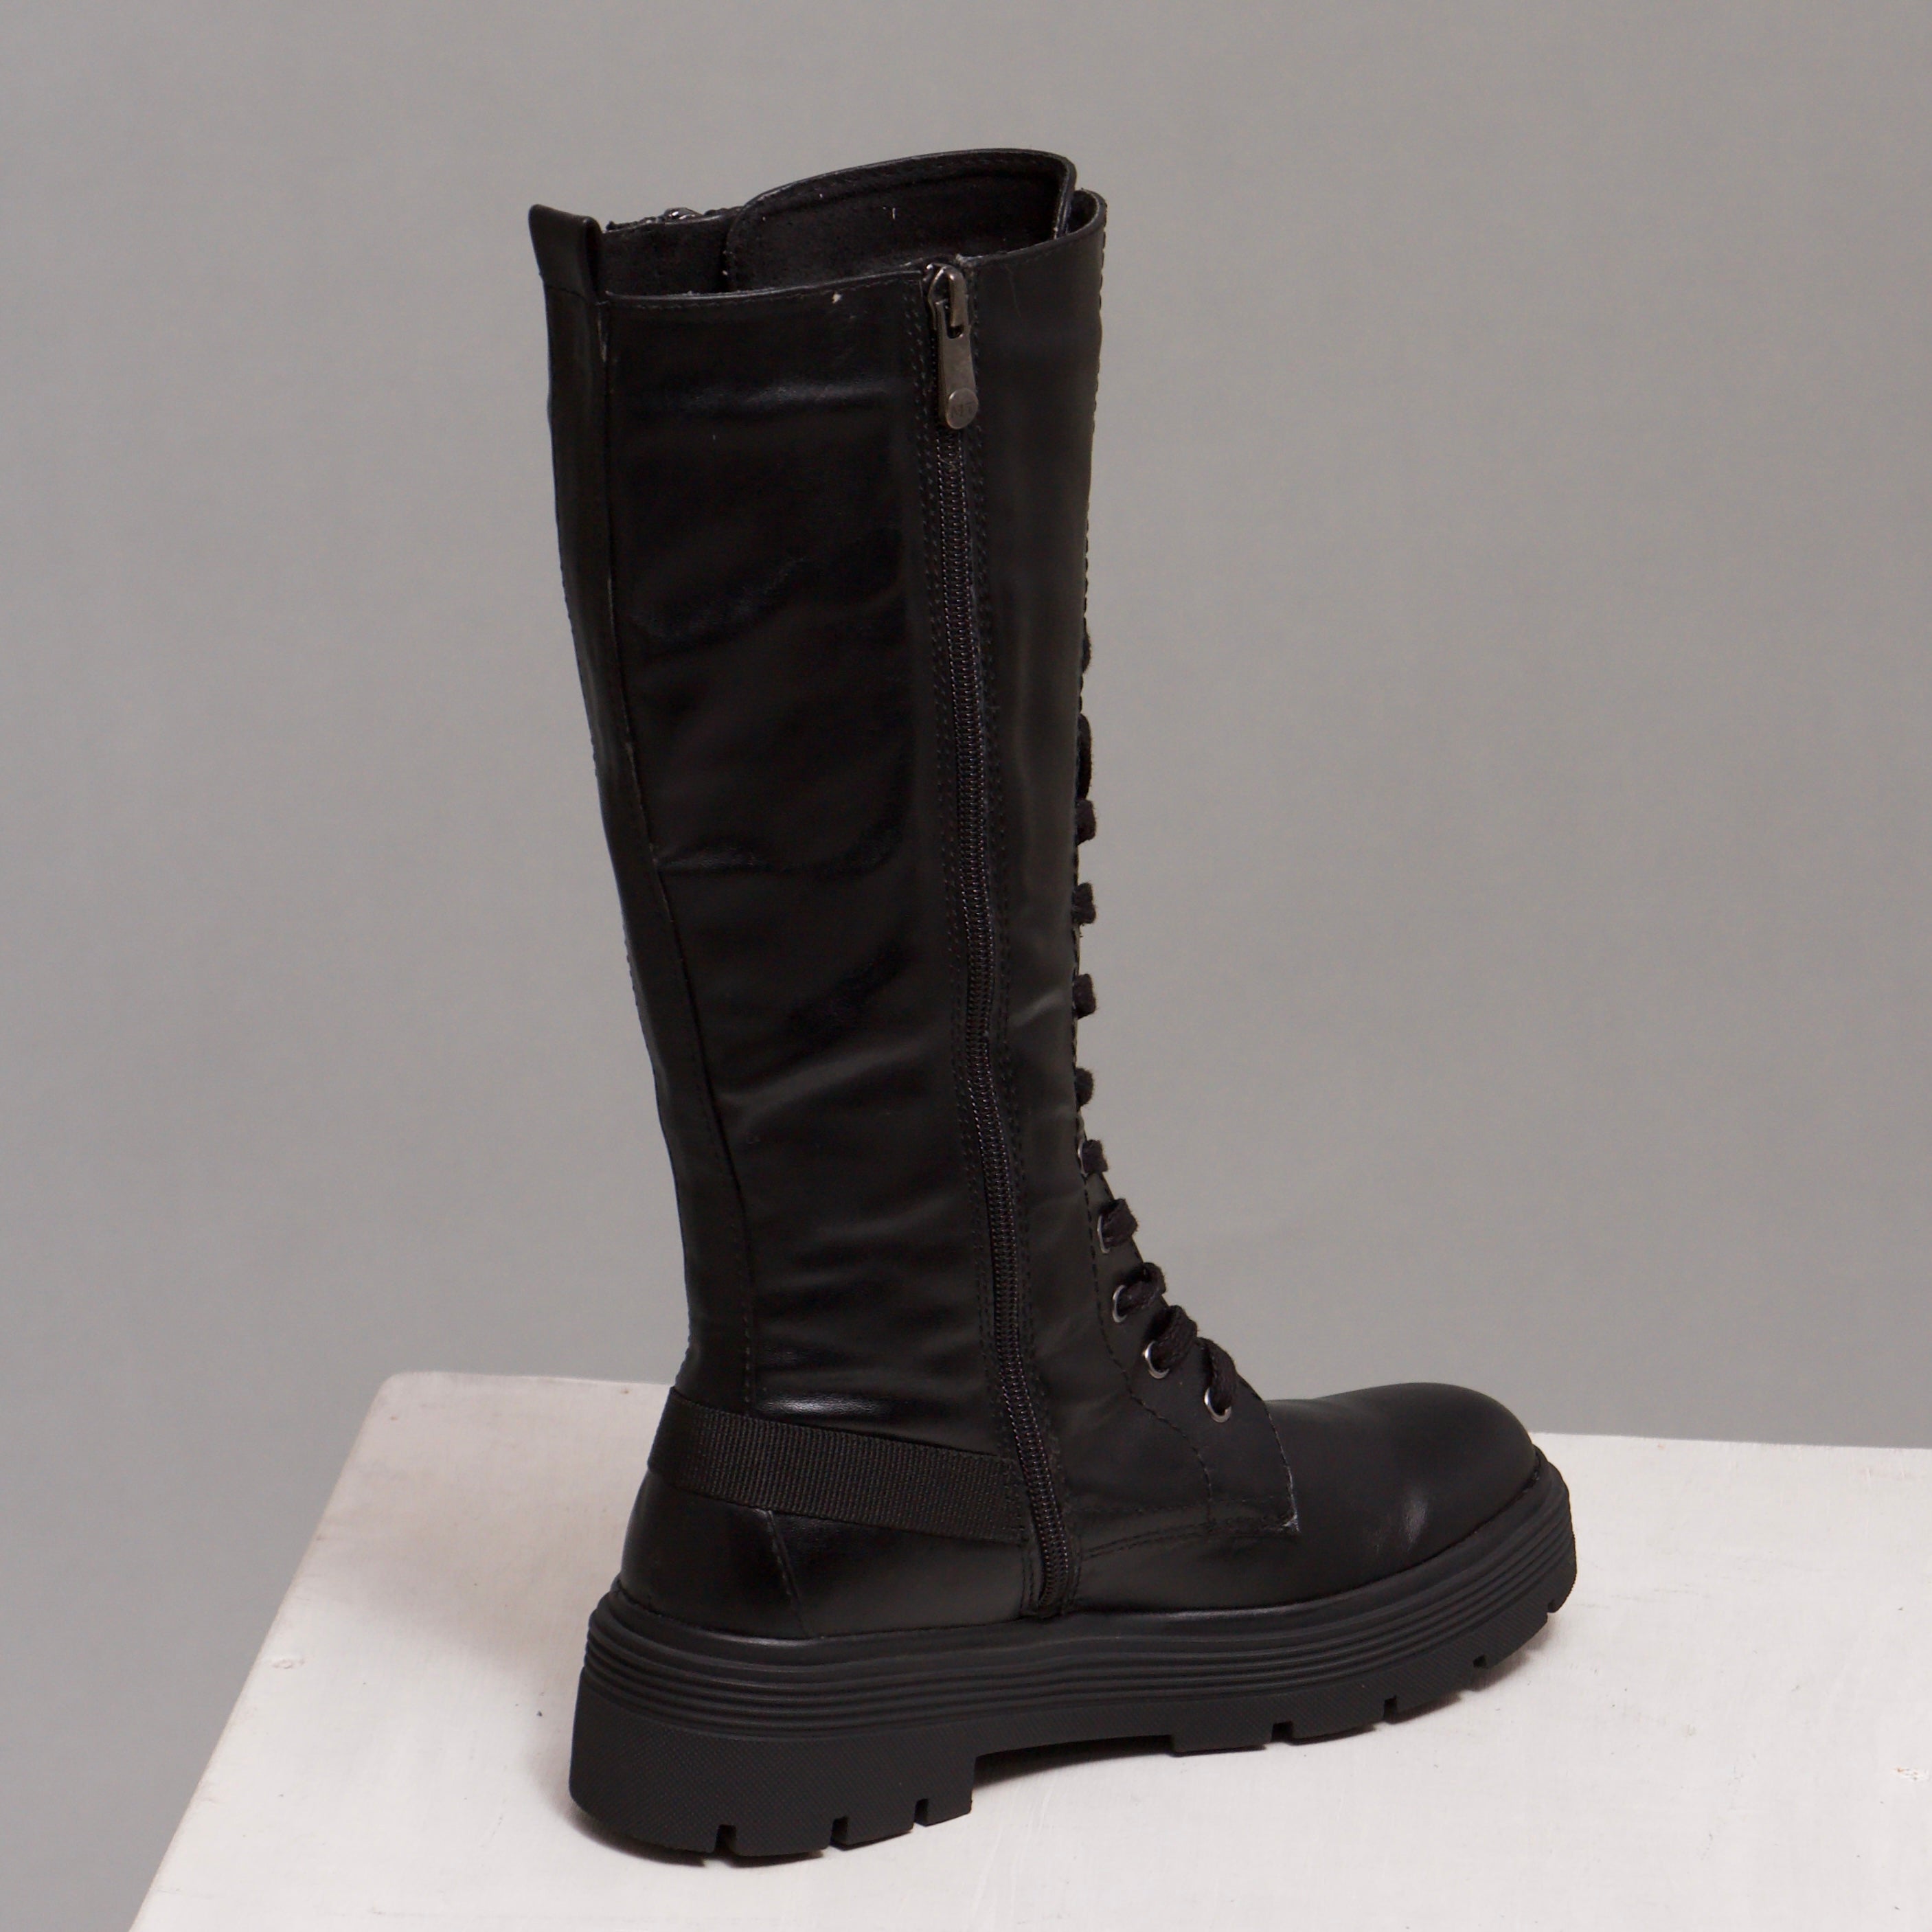 Long winter lace up boots